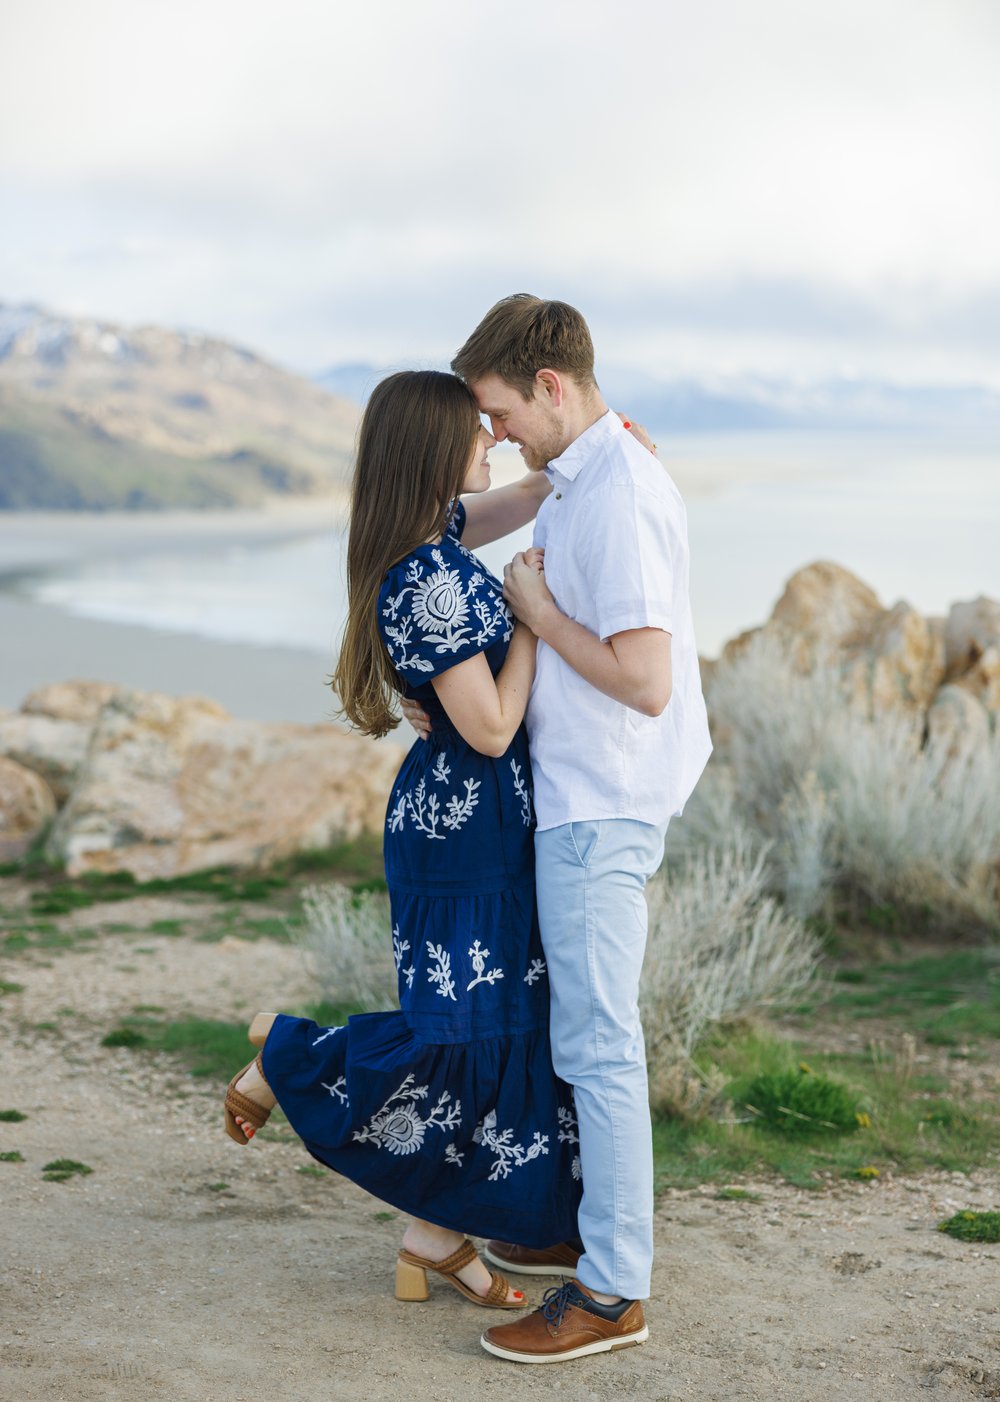  A simple and classic spring engagement photography session at Antelope Island with Professional wedding photographer Savanna Richardson Photography. Timeless engagements simple engagement photography #SavannaRichardsonPhotography #SavannaRichardsonE